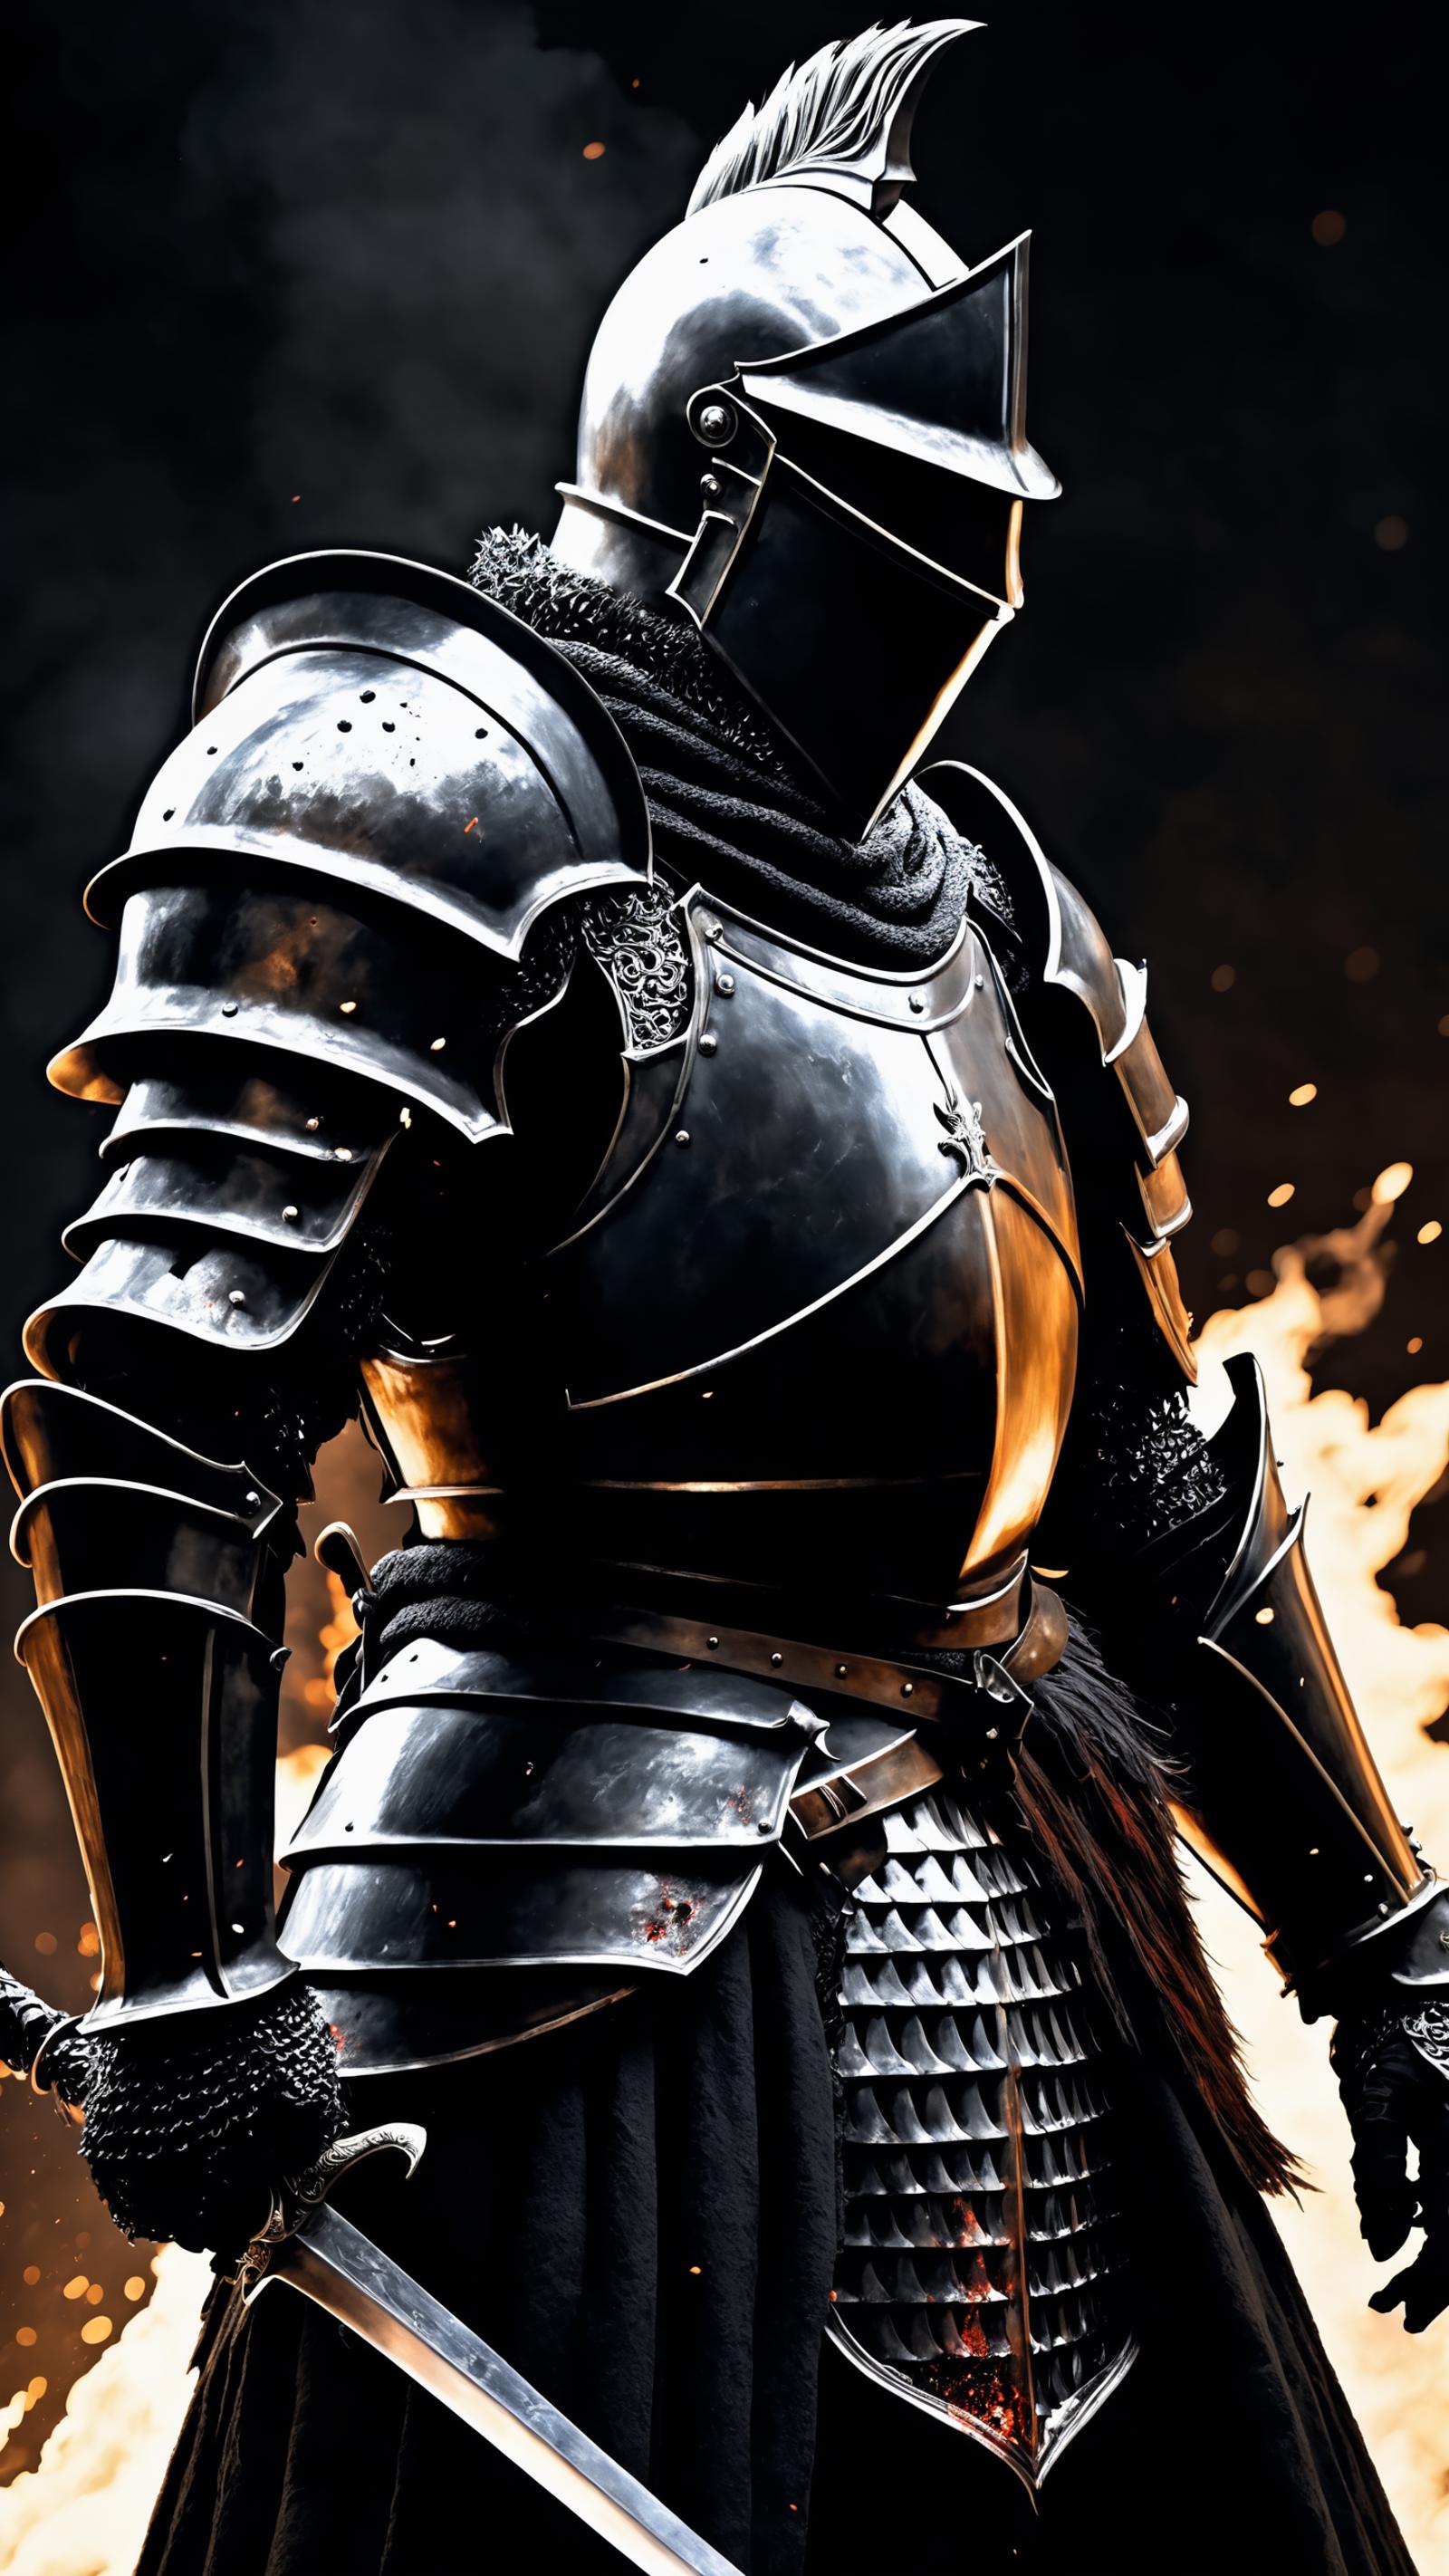 Medieval Warrior in Full Armor, Standing in a Blazing Fire